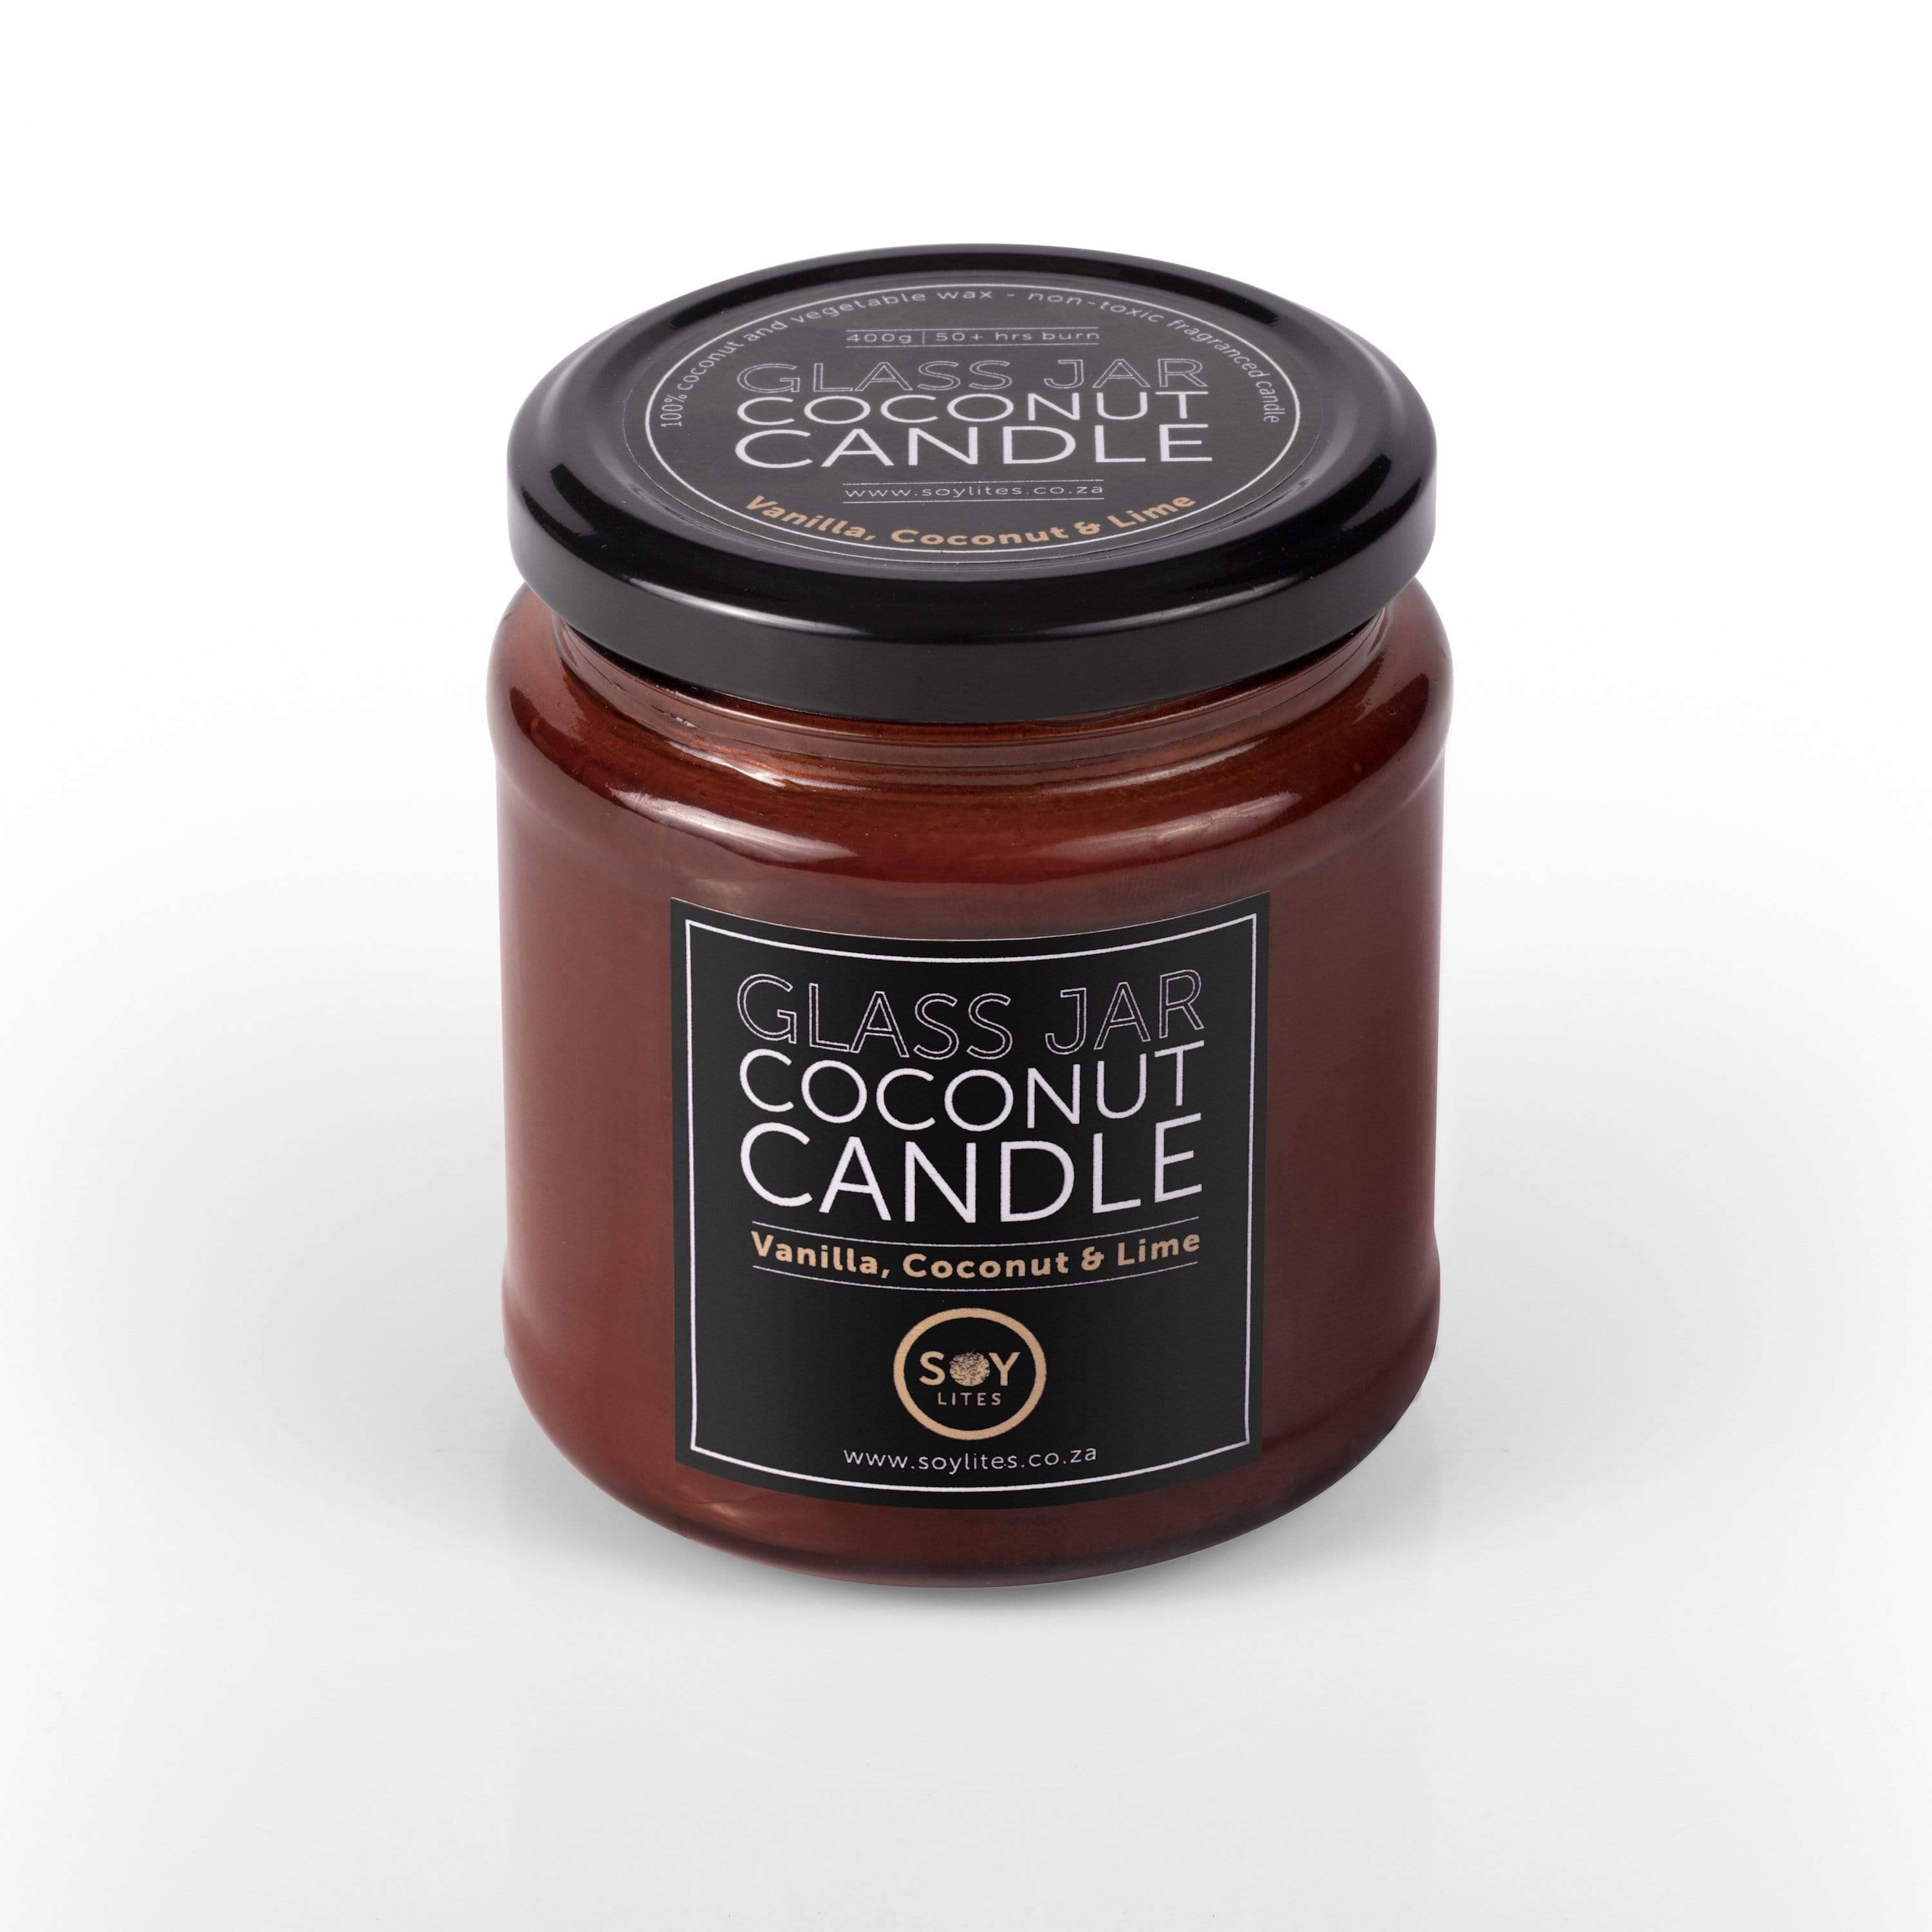 Coconut Candle with Coconut, Vanilla & Lime 200ml